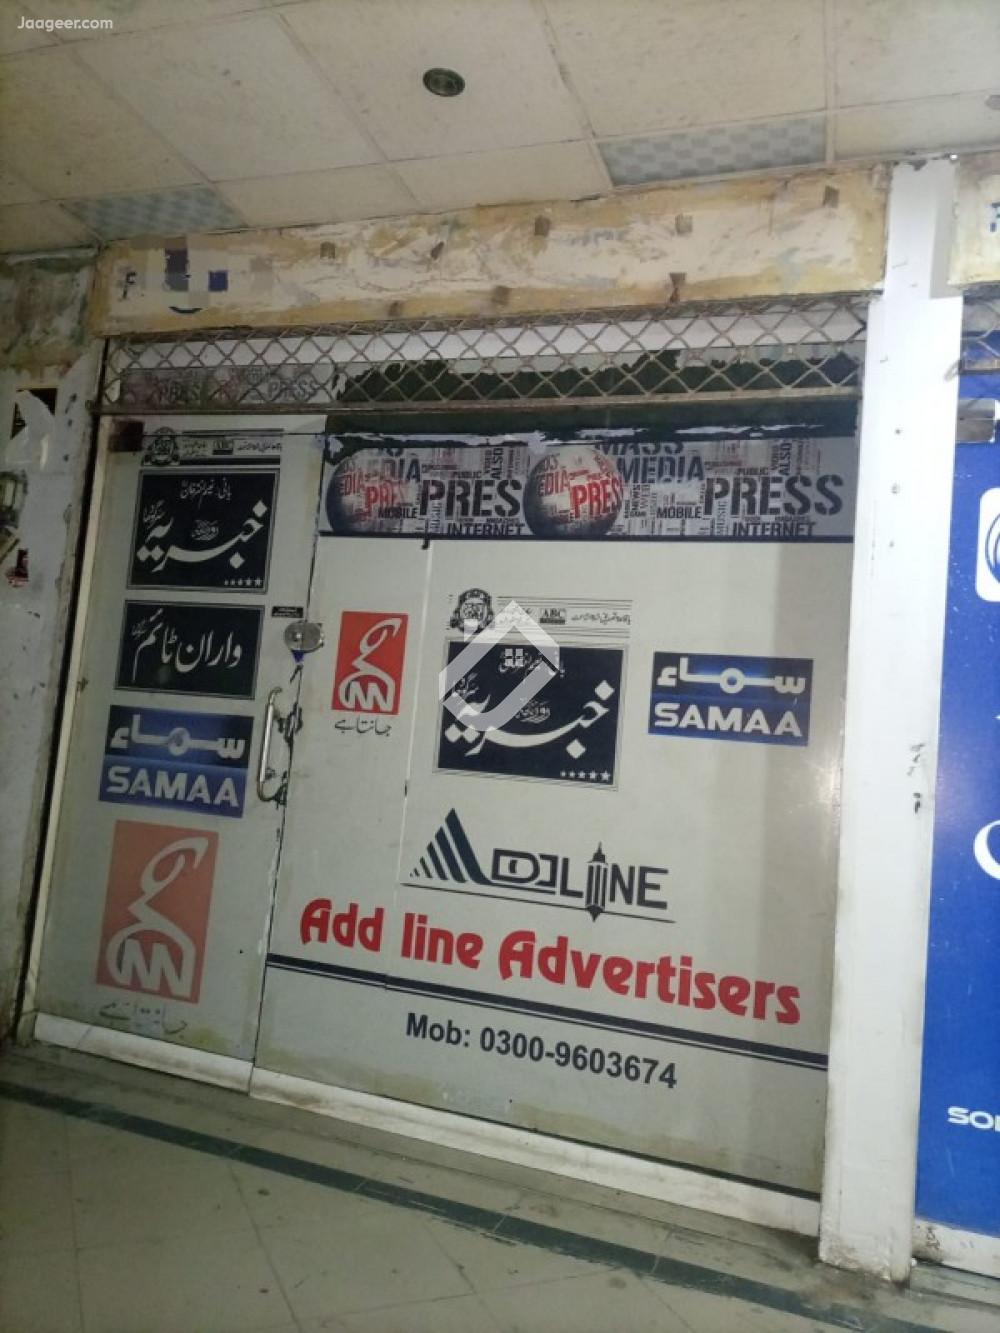 View  A Commercial Shop For Sale In Al-Rehman Plaza in Al-Rehman Plaza, Sargodha